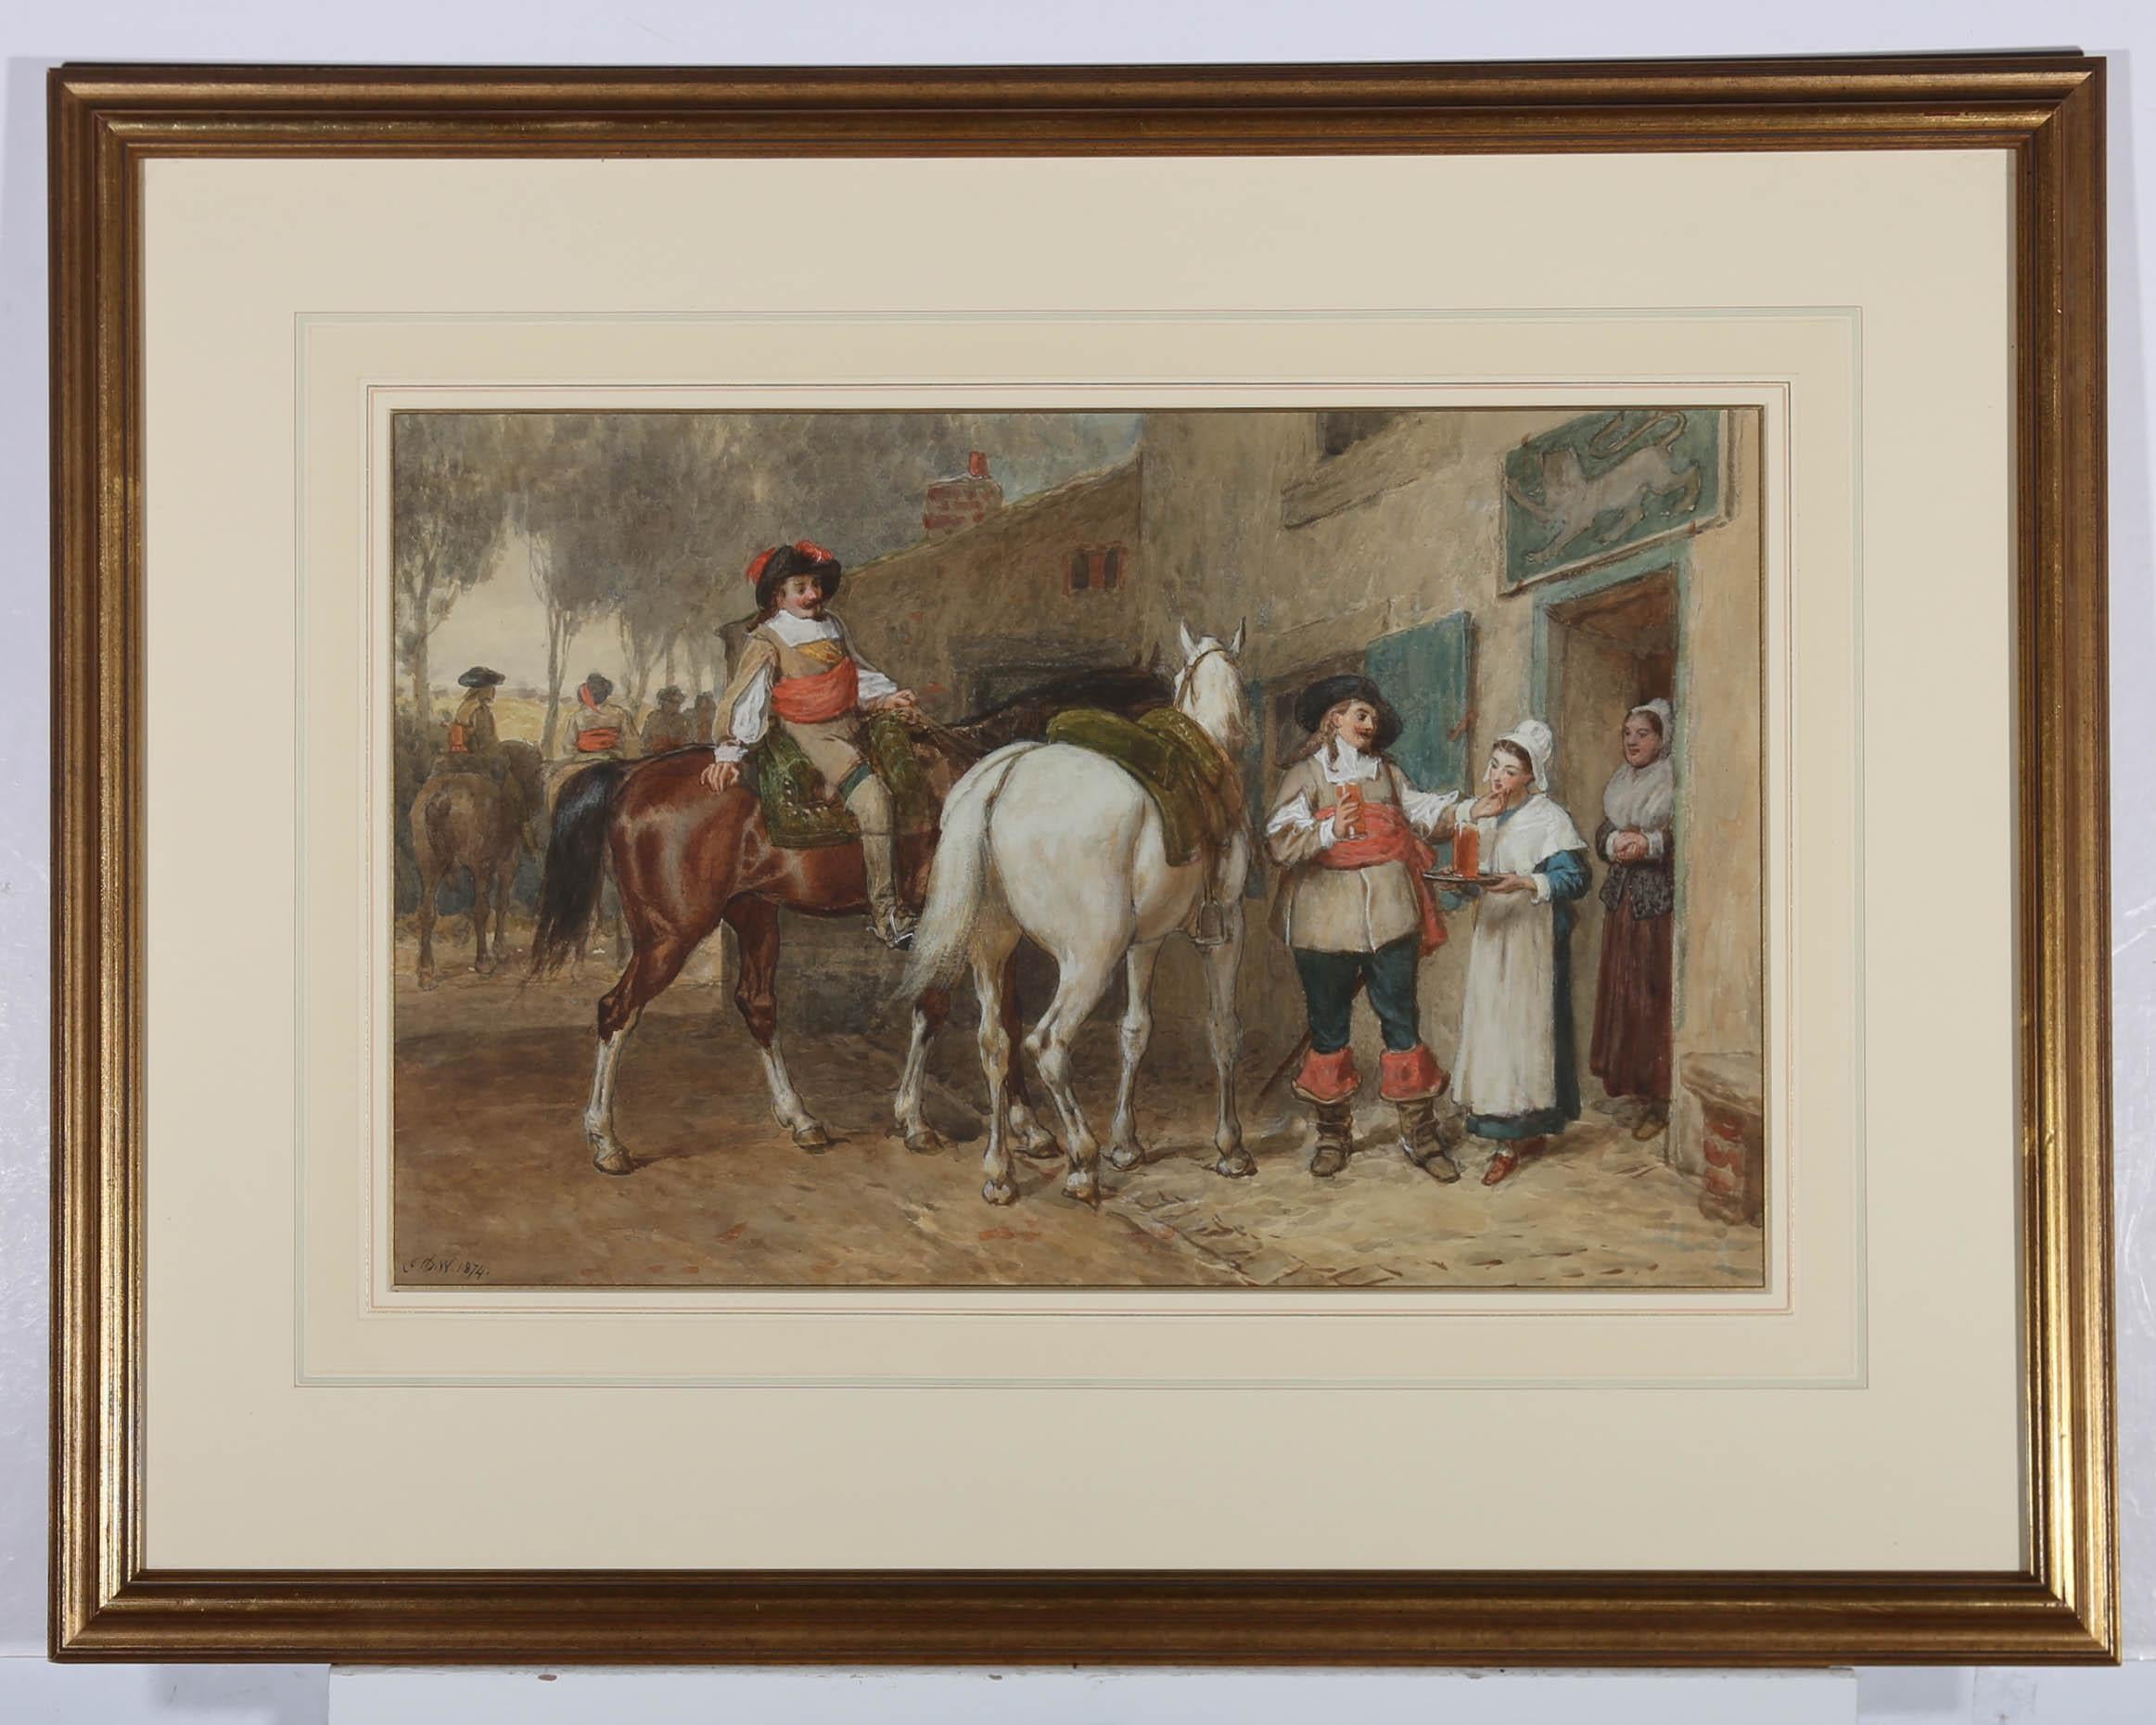 This fine watercolour study depicts a scene of mounted Cavalier stopping at a village inn. The rest of the men look ready to make haste, while the last two are left lingering for a second pint of ale and a look at the innkeeper's beautiful daughter.